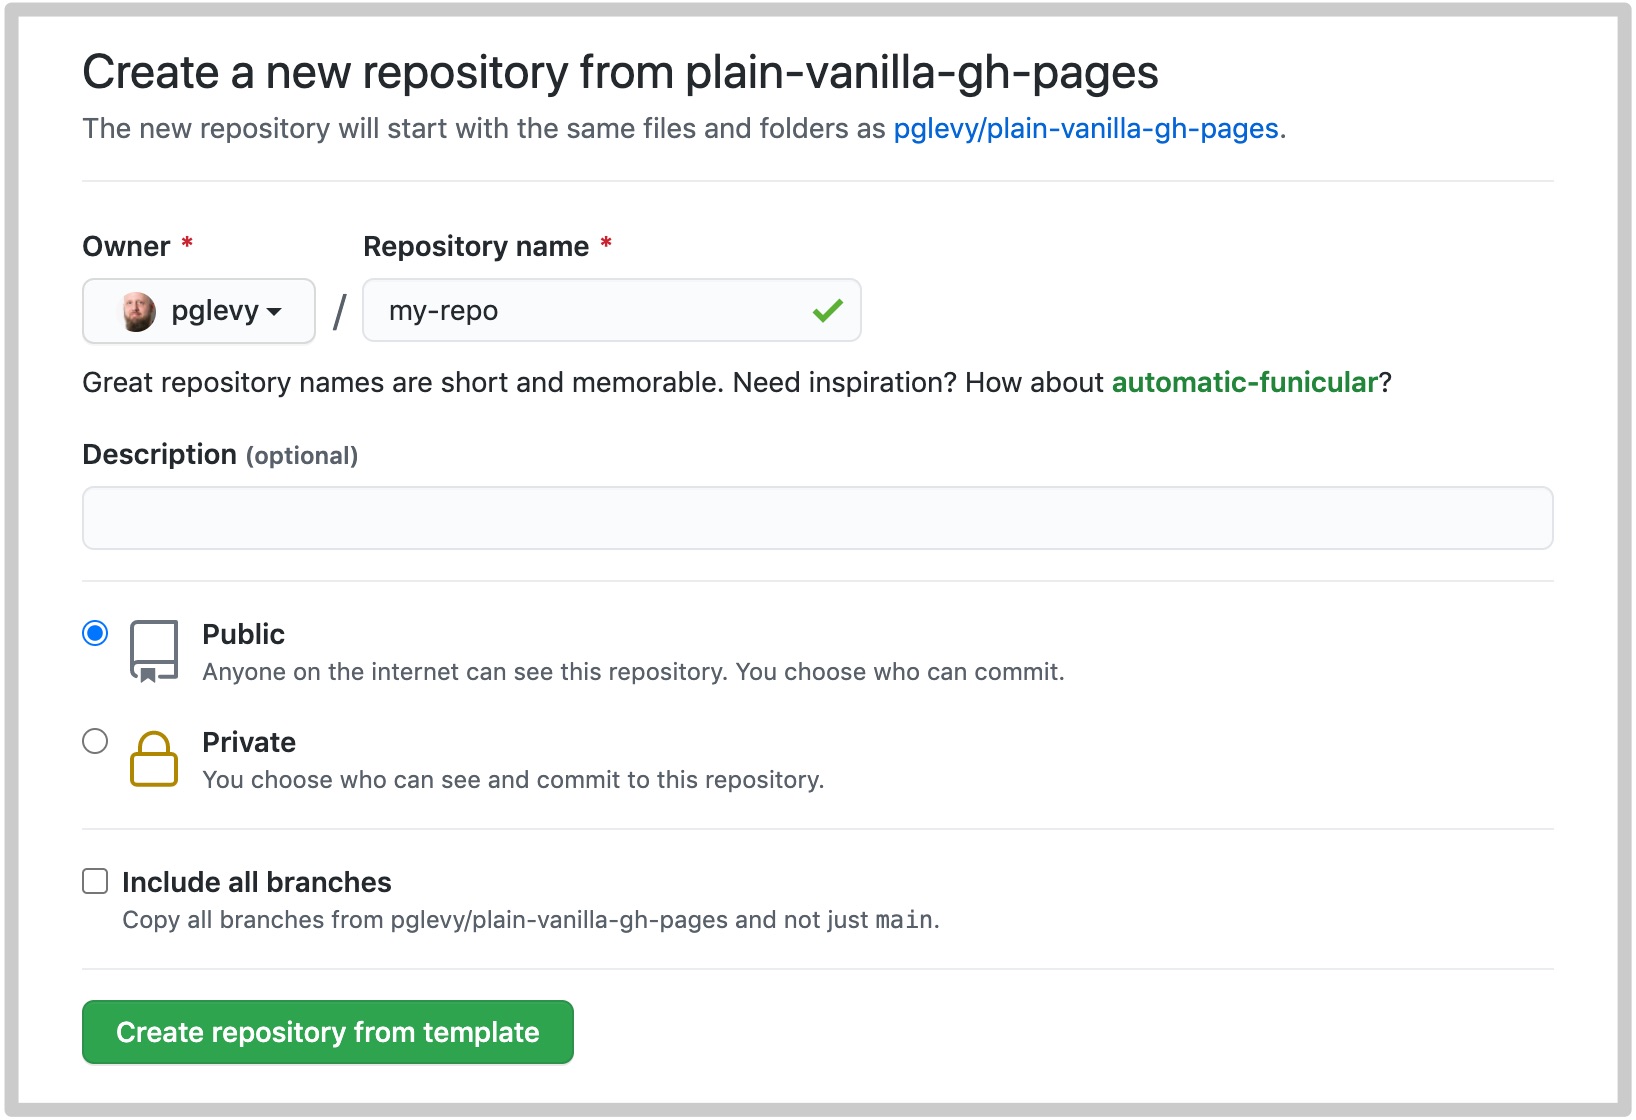 Screenshot of "create a new repository" action